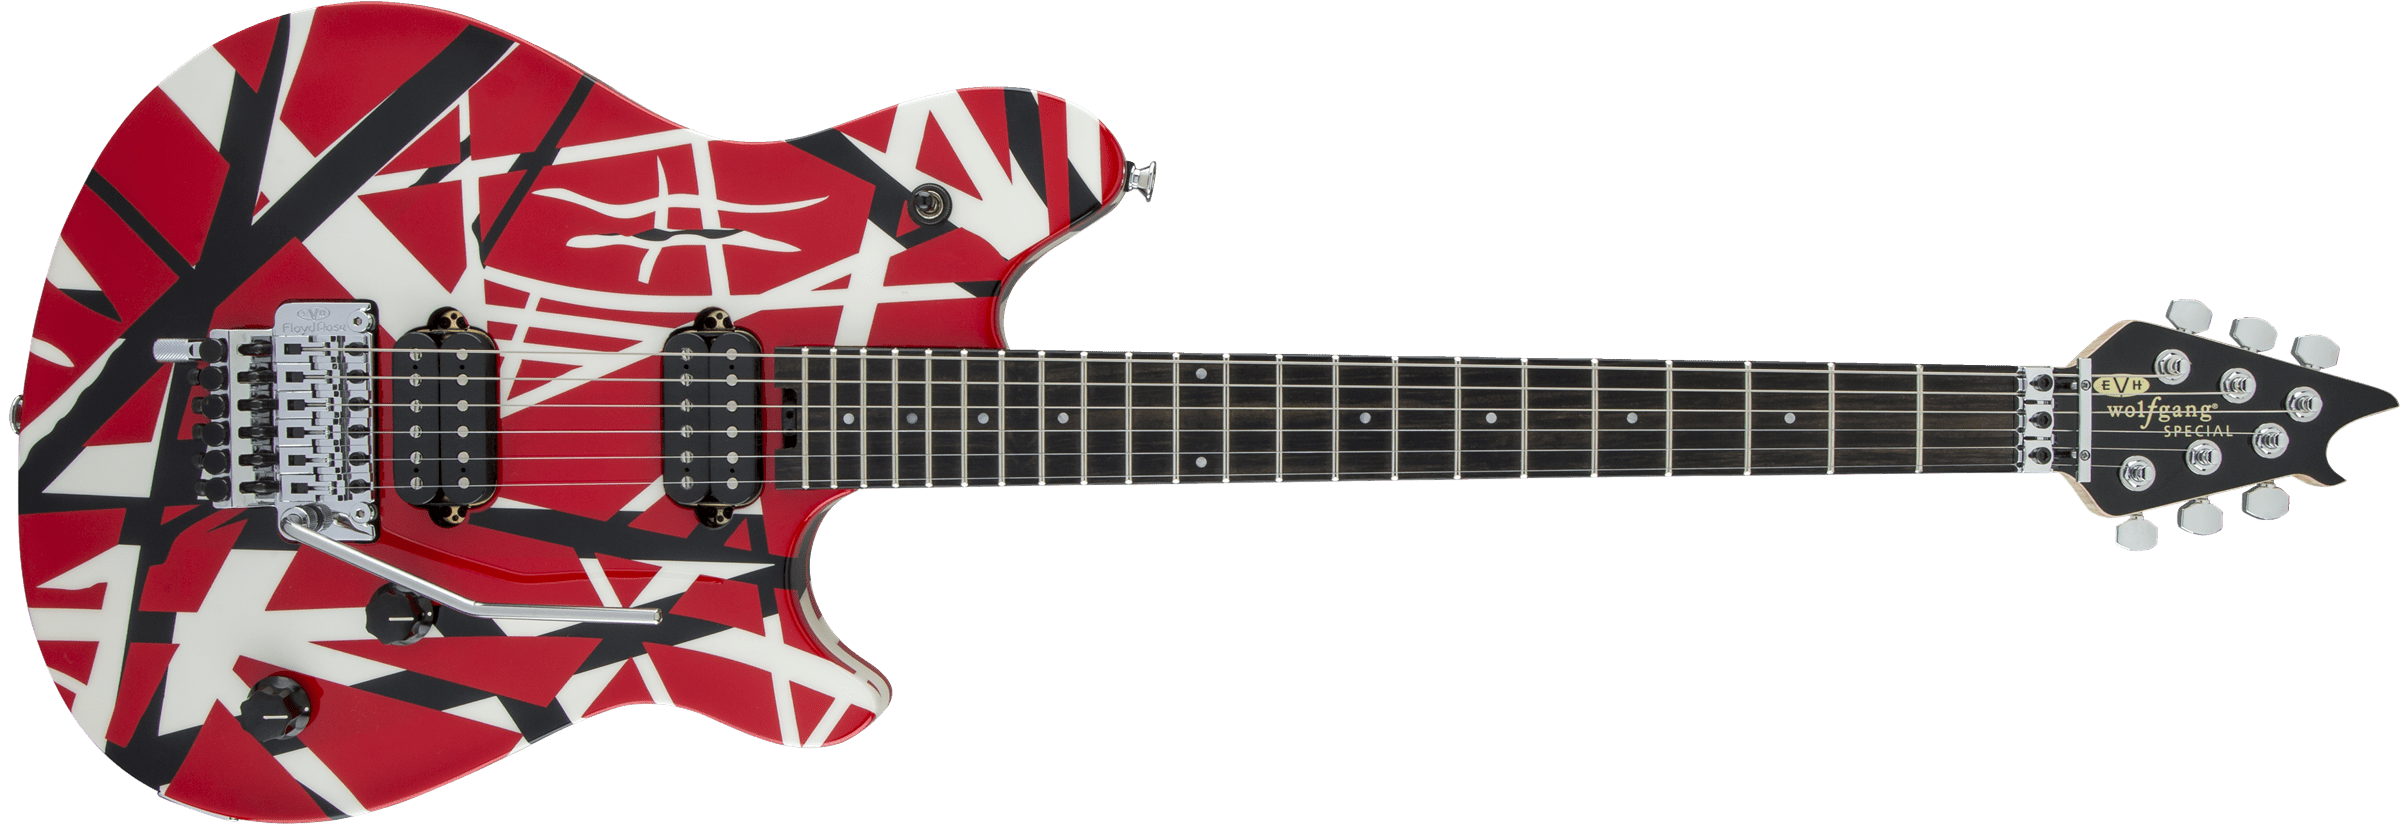 Guitar clipart name. Project evh understanding the